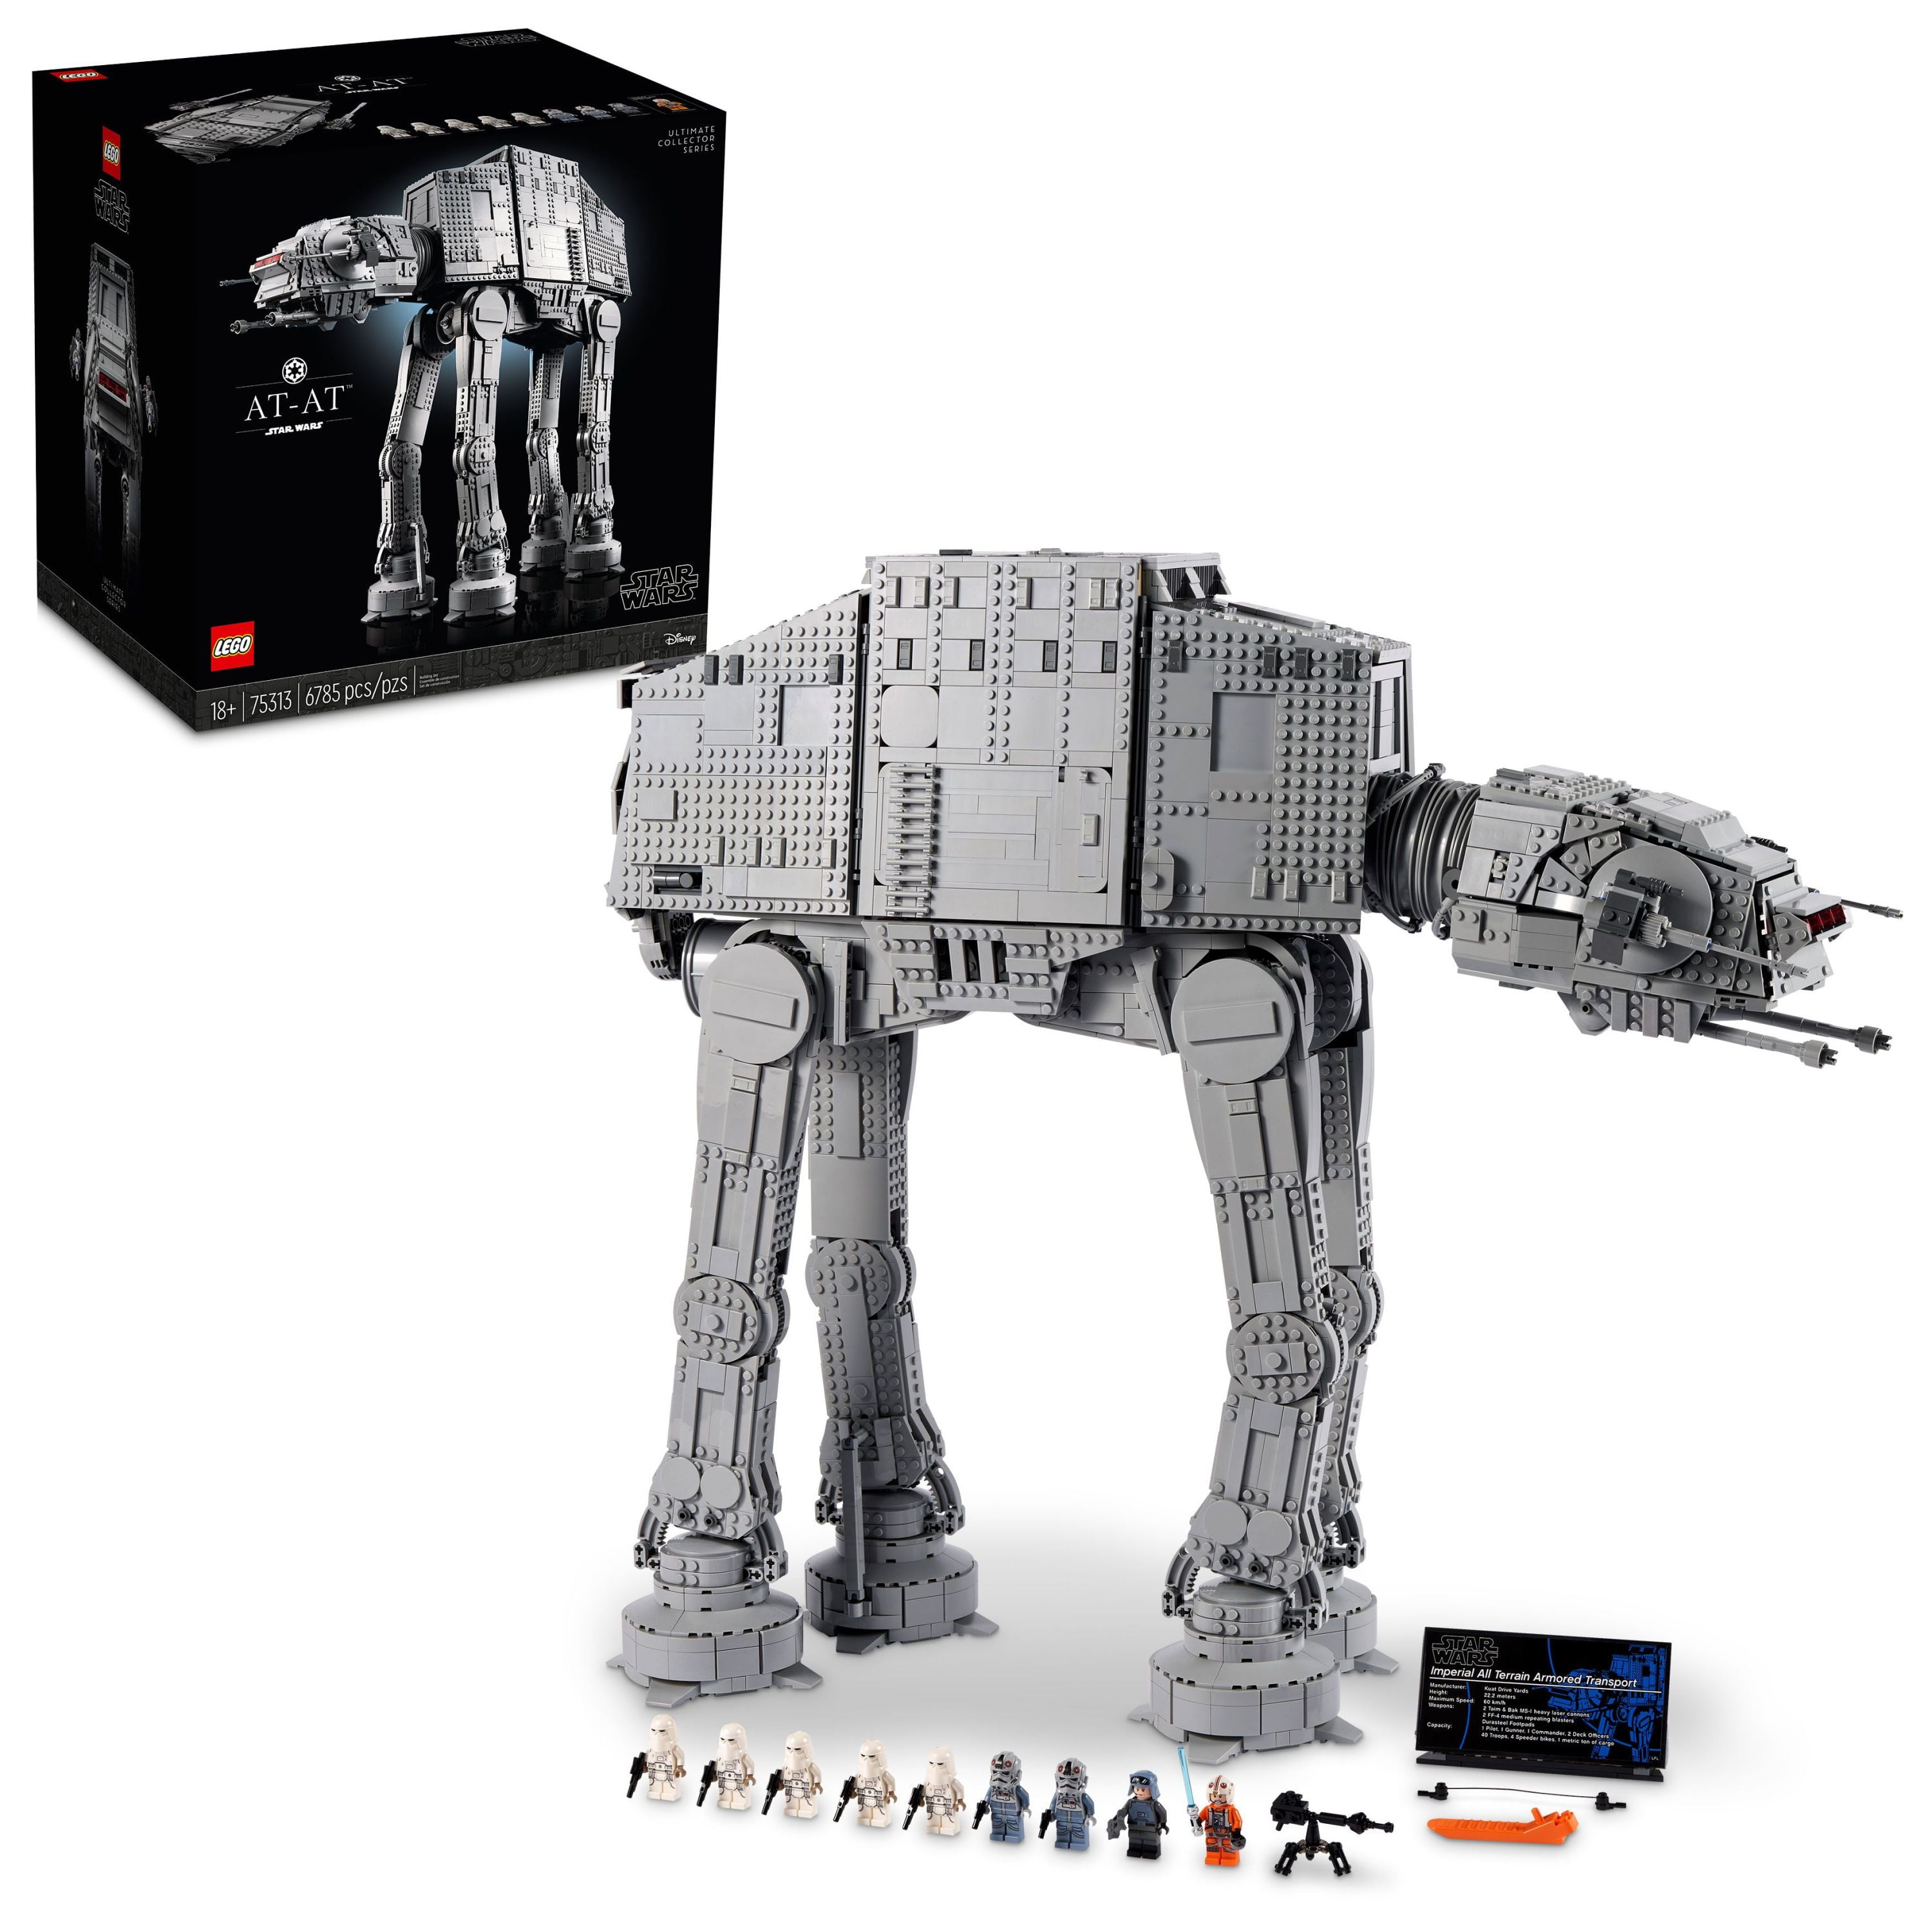 LEGO Wars AT-AT Walker 75313 Buildable Collectible Set for Adults, Ultimate Build Display Set, 9 Minifigures including General Veers, Luke Skywalker, Snowtroopers and AT-AT Drivers - Walmart.com